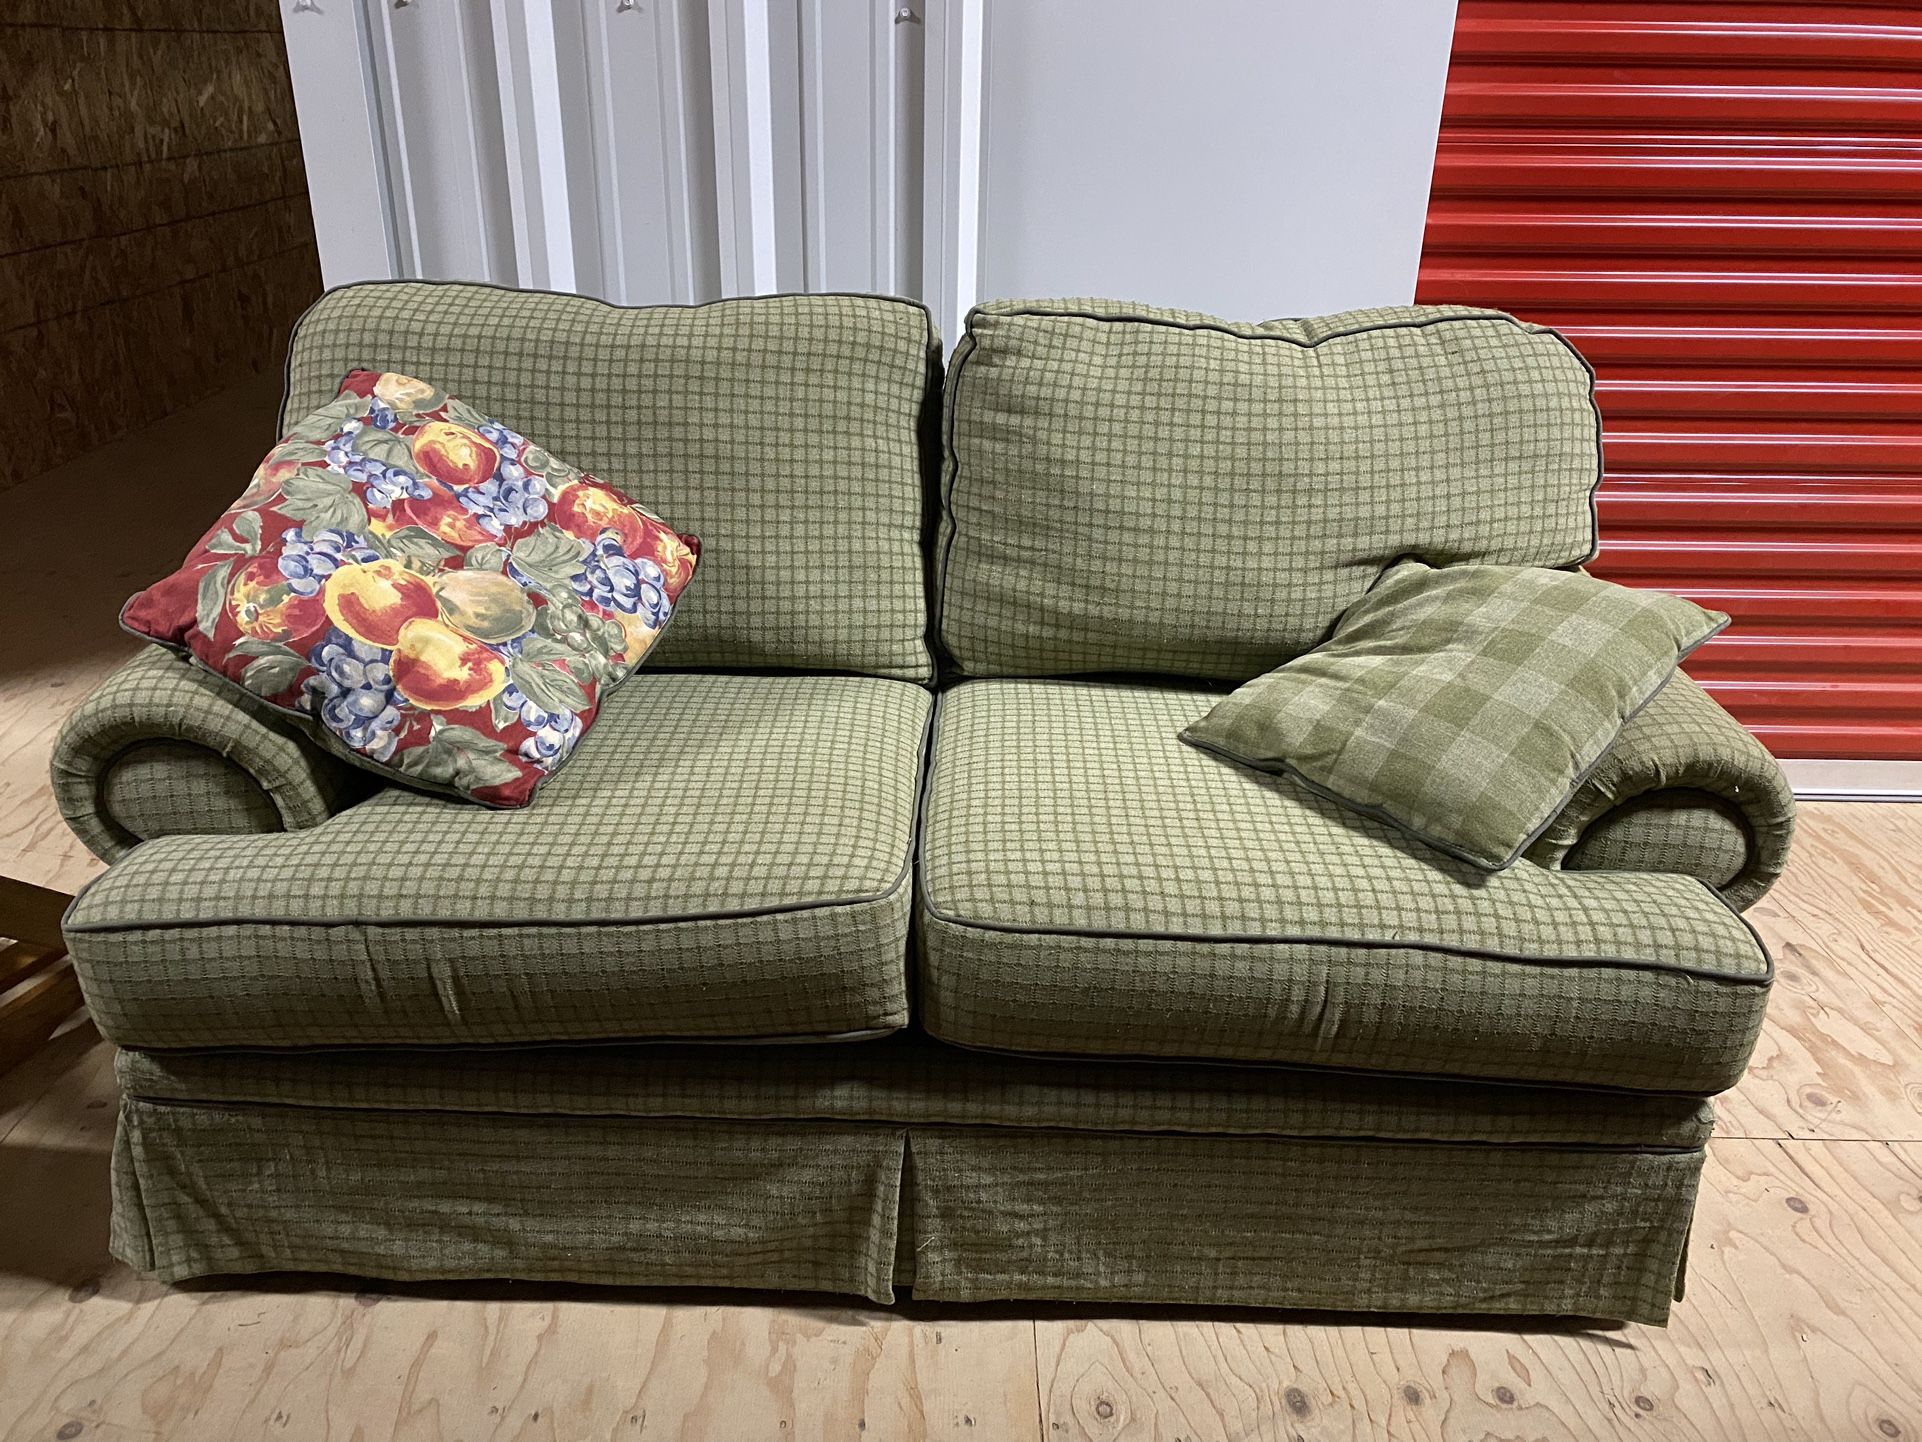 Small Plaid Green Couch With Pillows